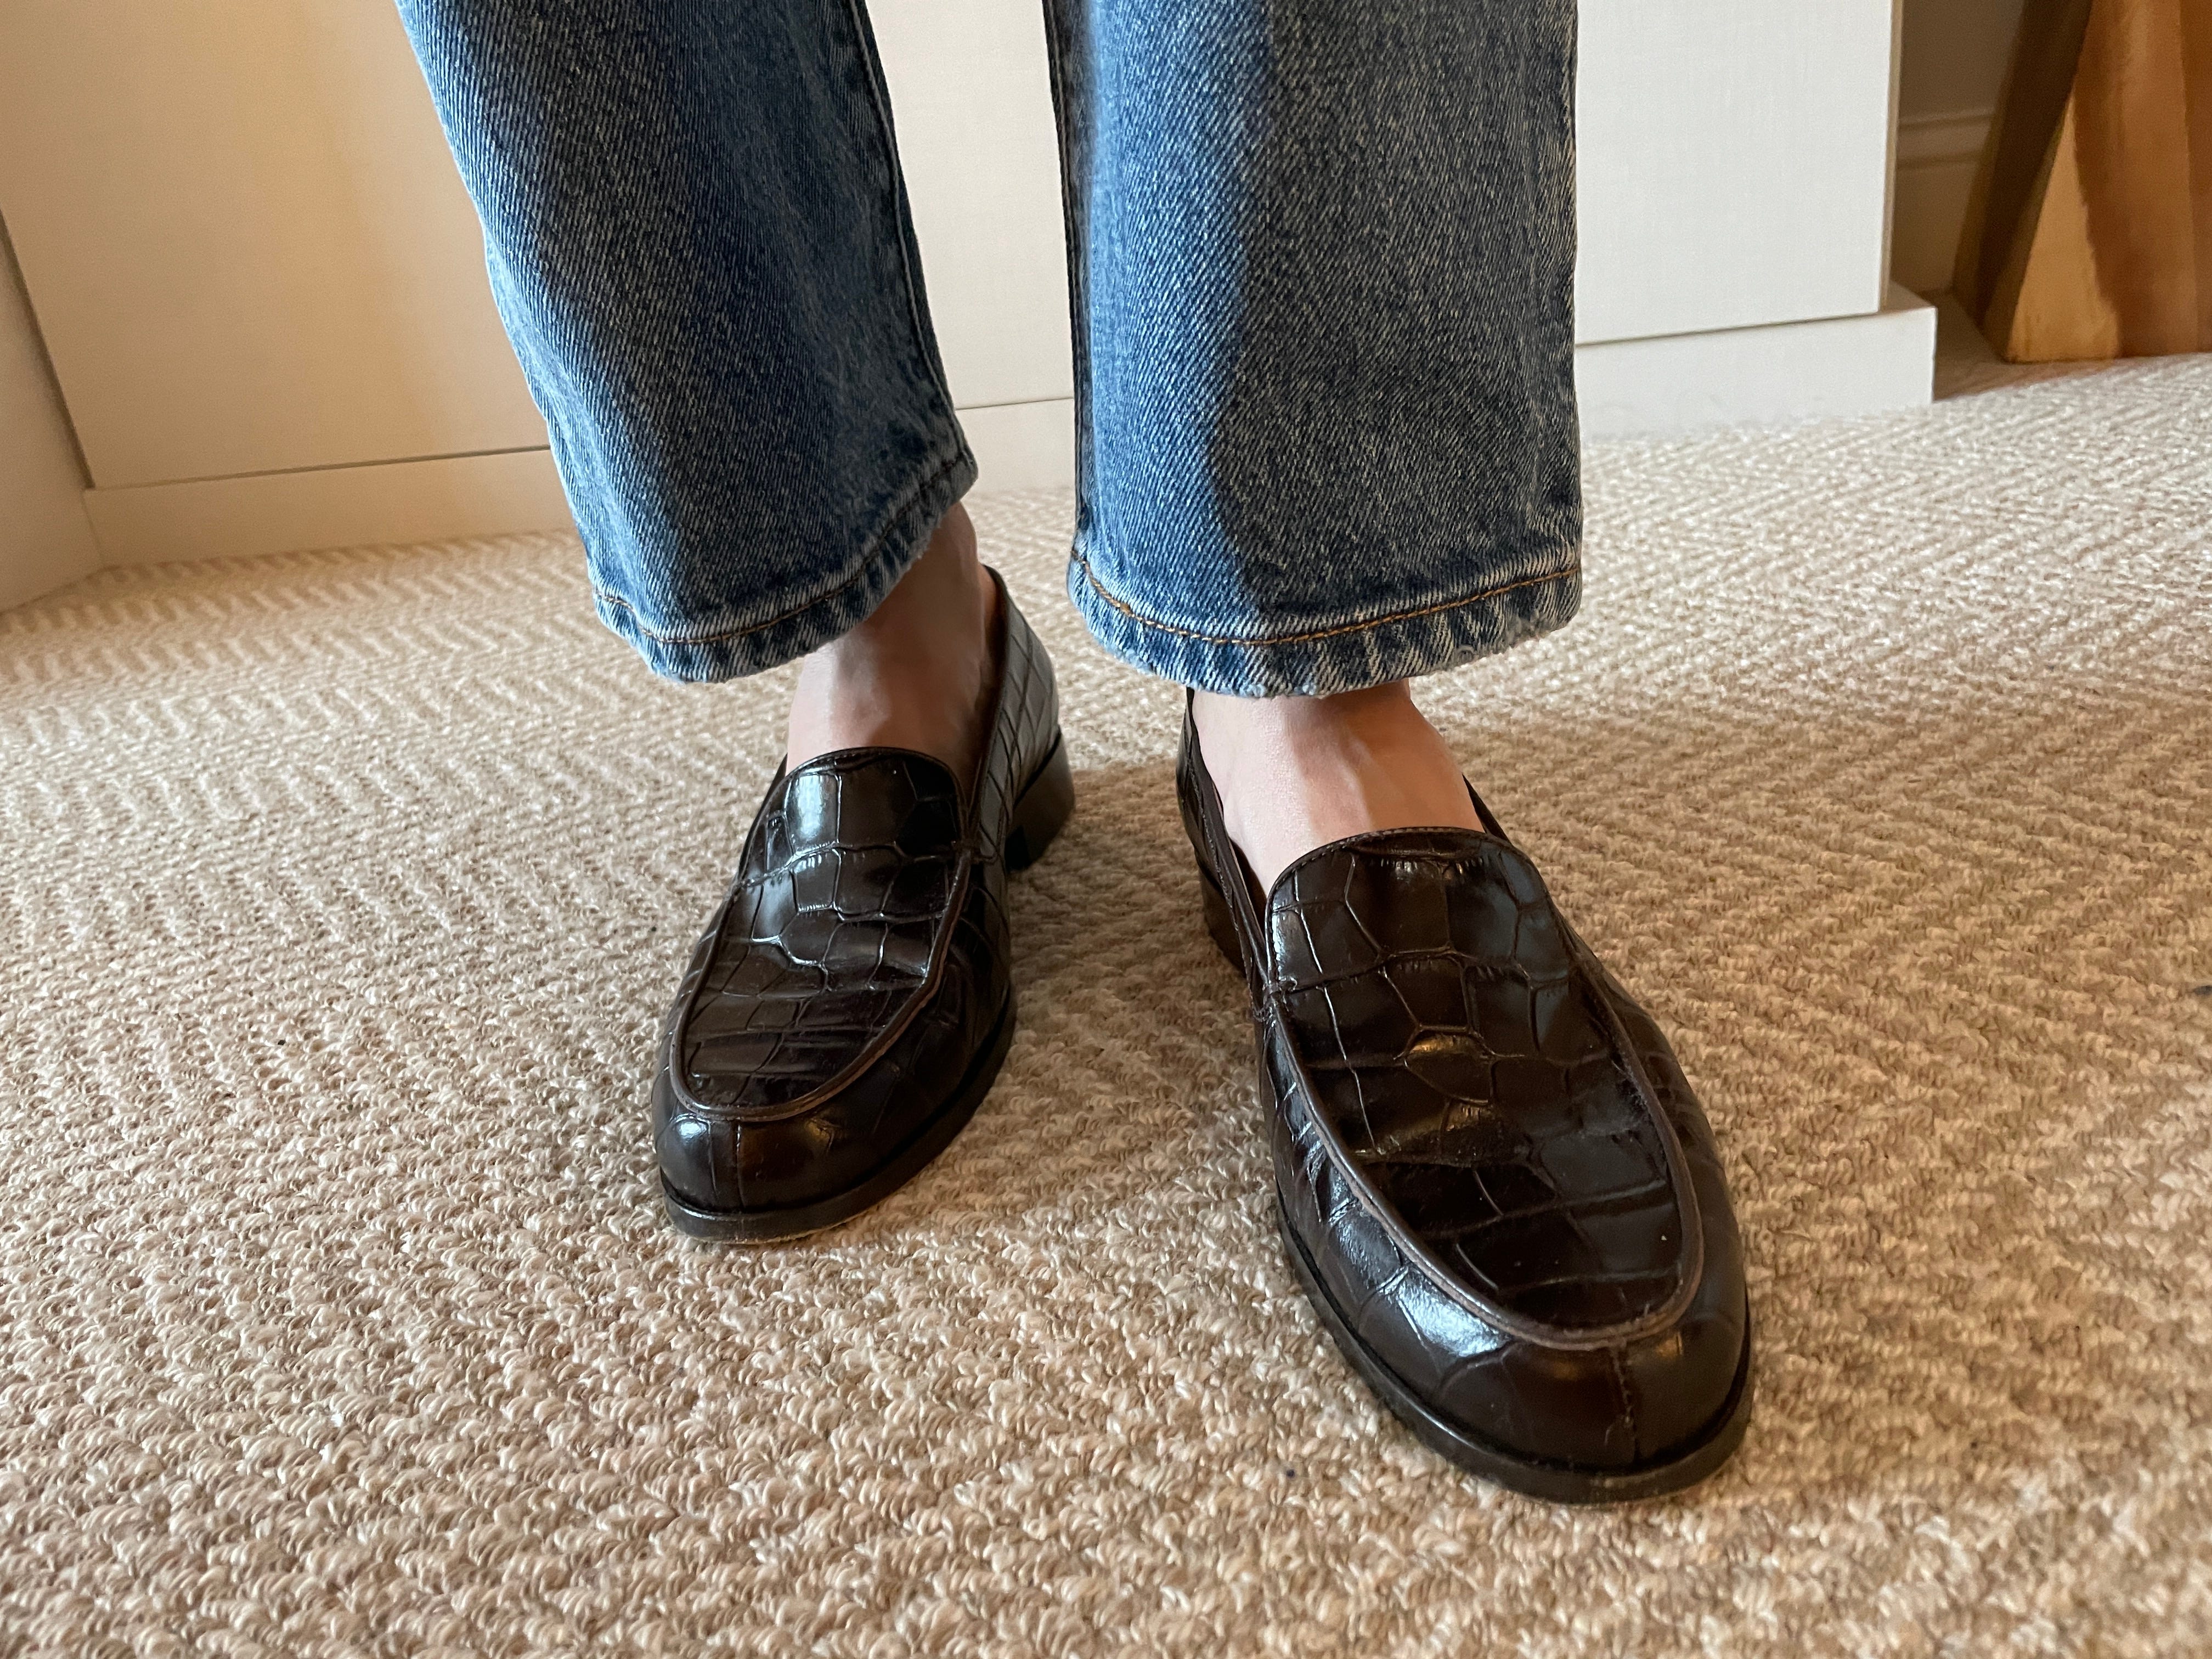 Rediscovering and Refashioning Loafers - by Becky Malinsky